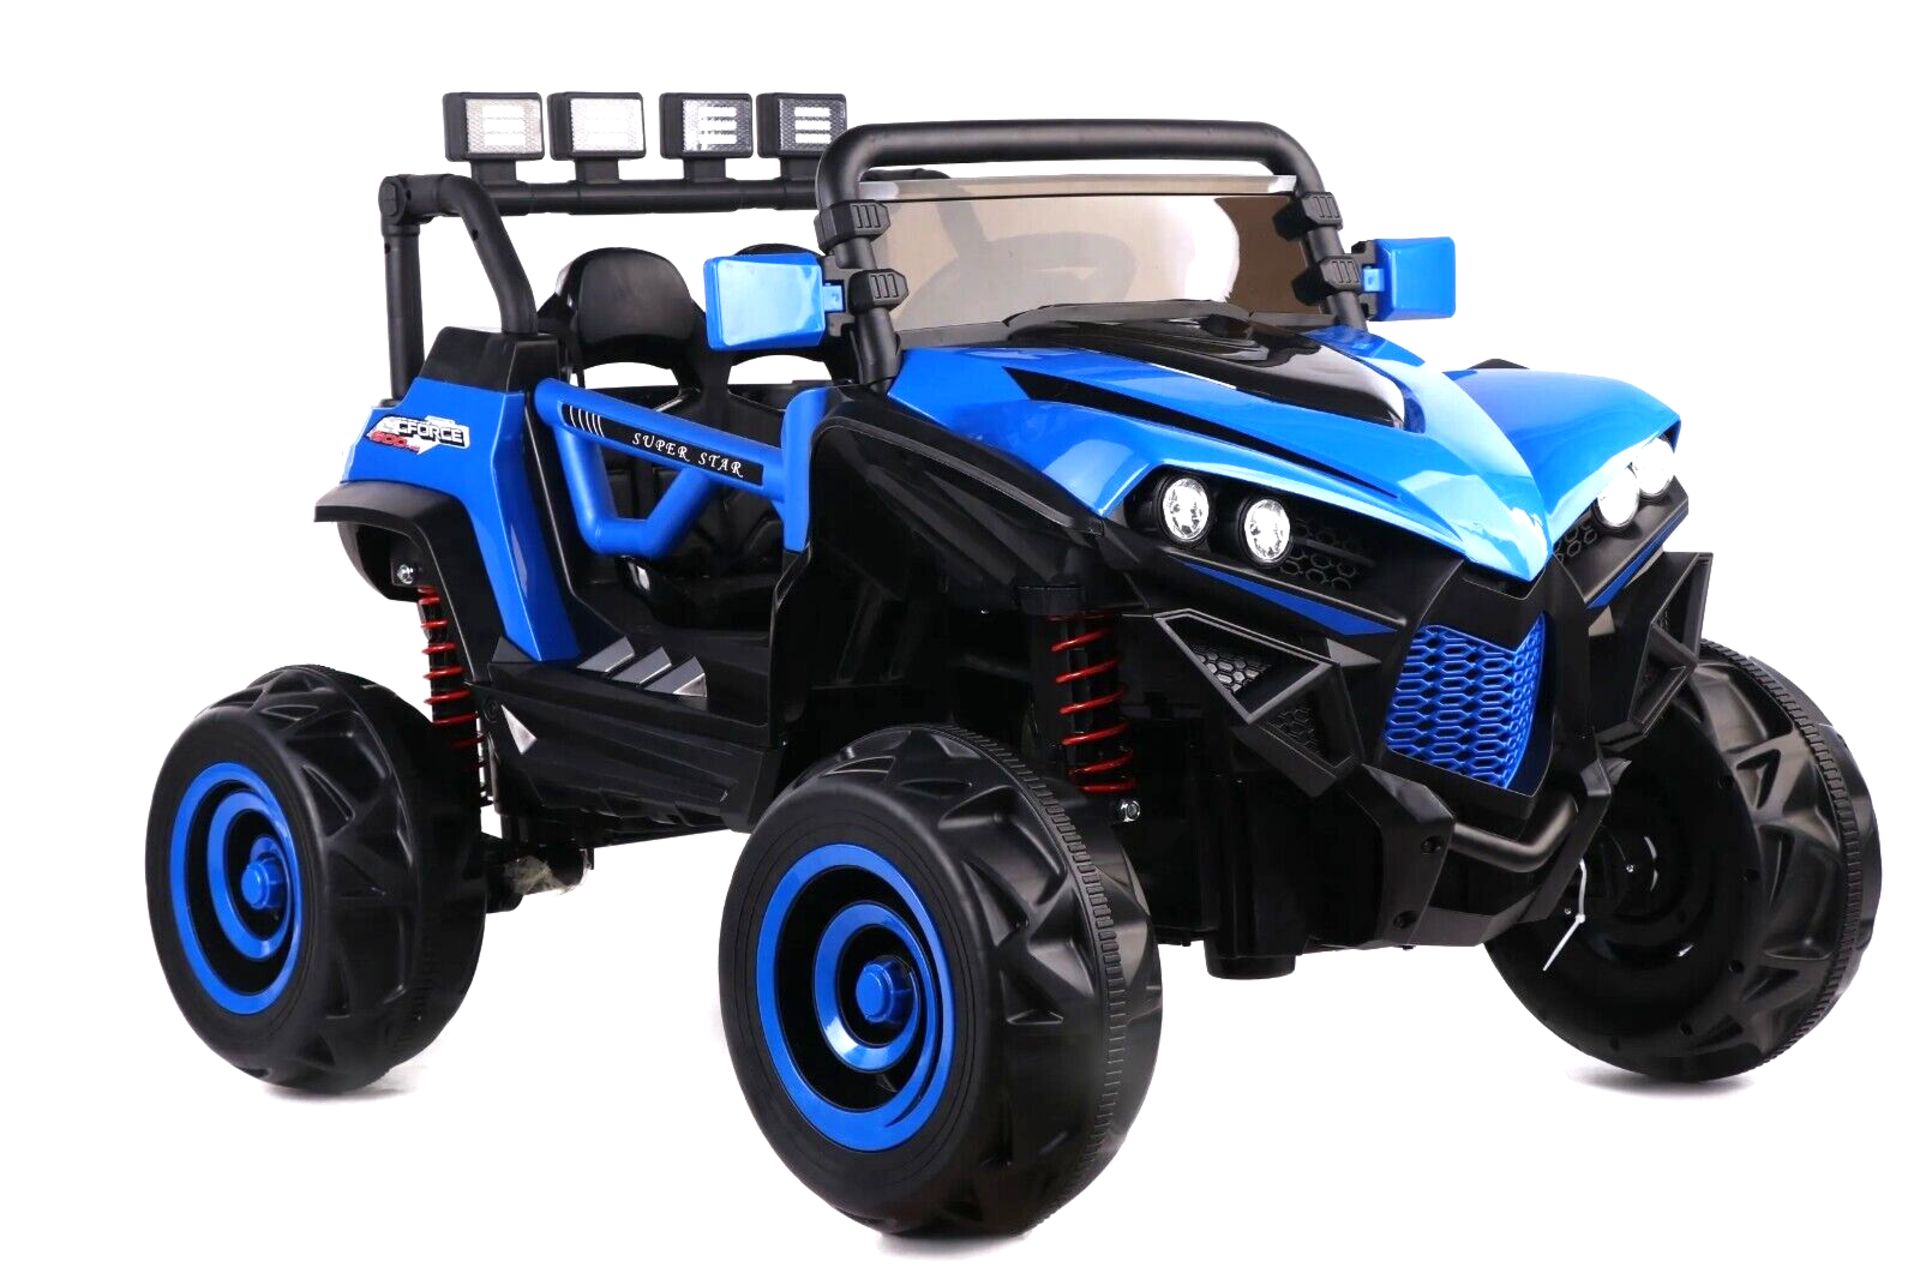 JOB LOT 5 X BLUE 4X4 ATV/UTV KIDS BUGGY JEEP ELECTRIC CAR WITH REMOTE BRAND NEW BOXED - Image 2 of 5